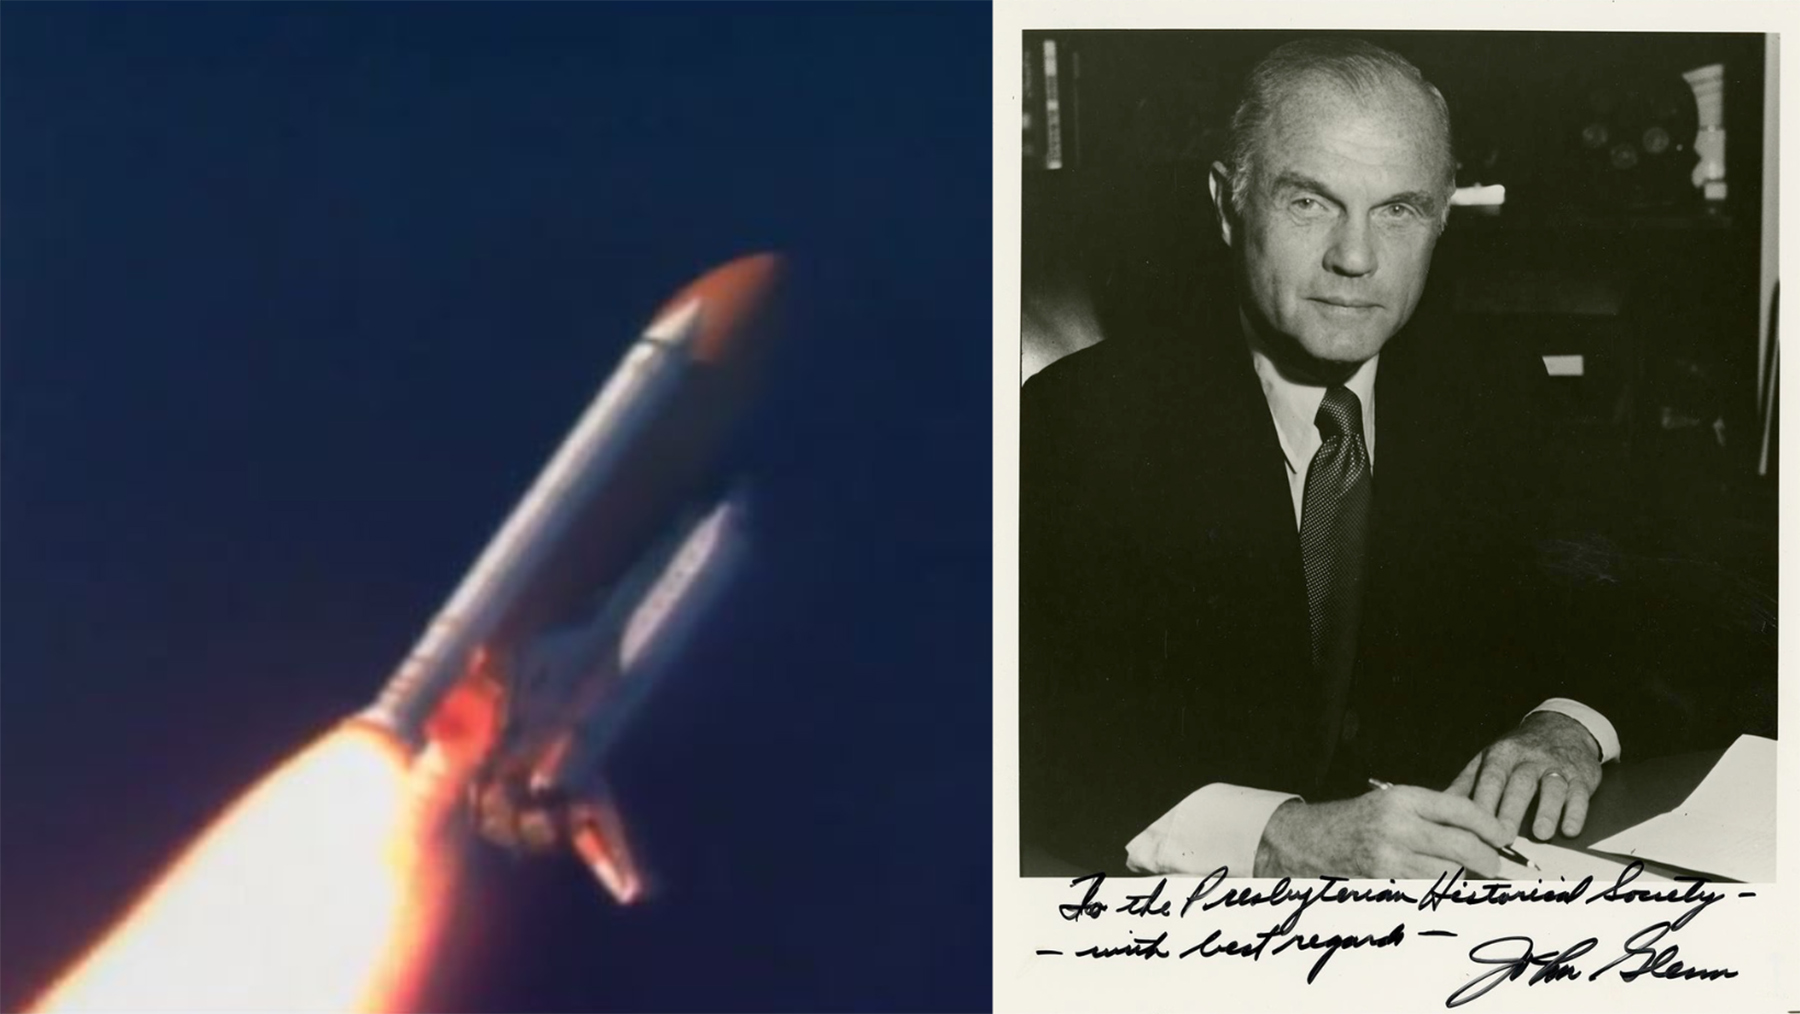 Left: screengrab from NASA-TV clip of John Glenn's 1998 launch, PC(USA) Communications and Funds Development, Media Services, Pearl ID: 145328. Right: autographed portrait of John Glenn, 1981, Pearl ID: 8623 